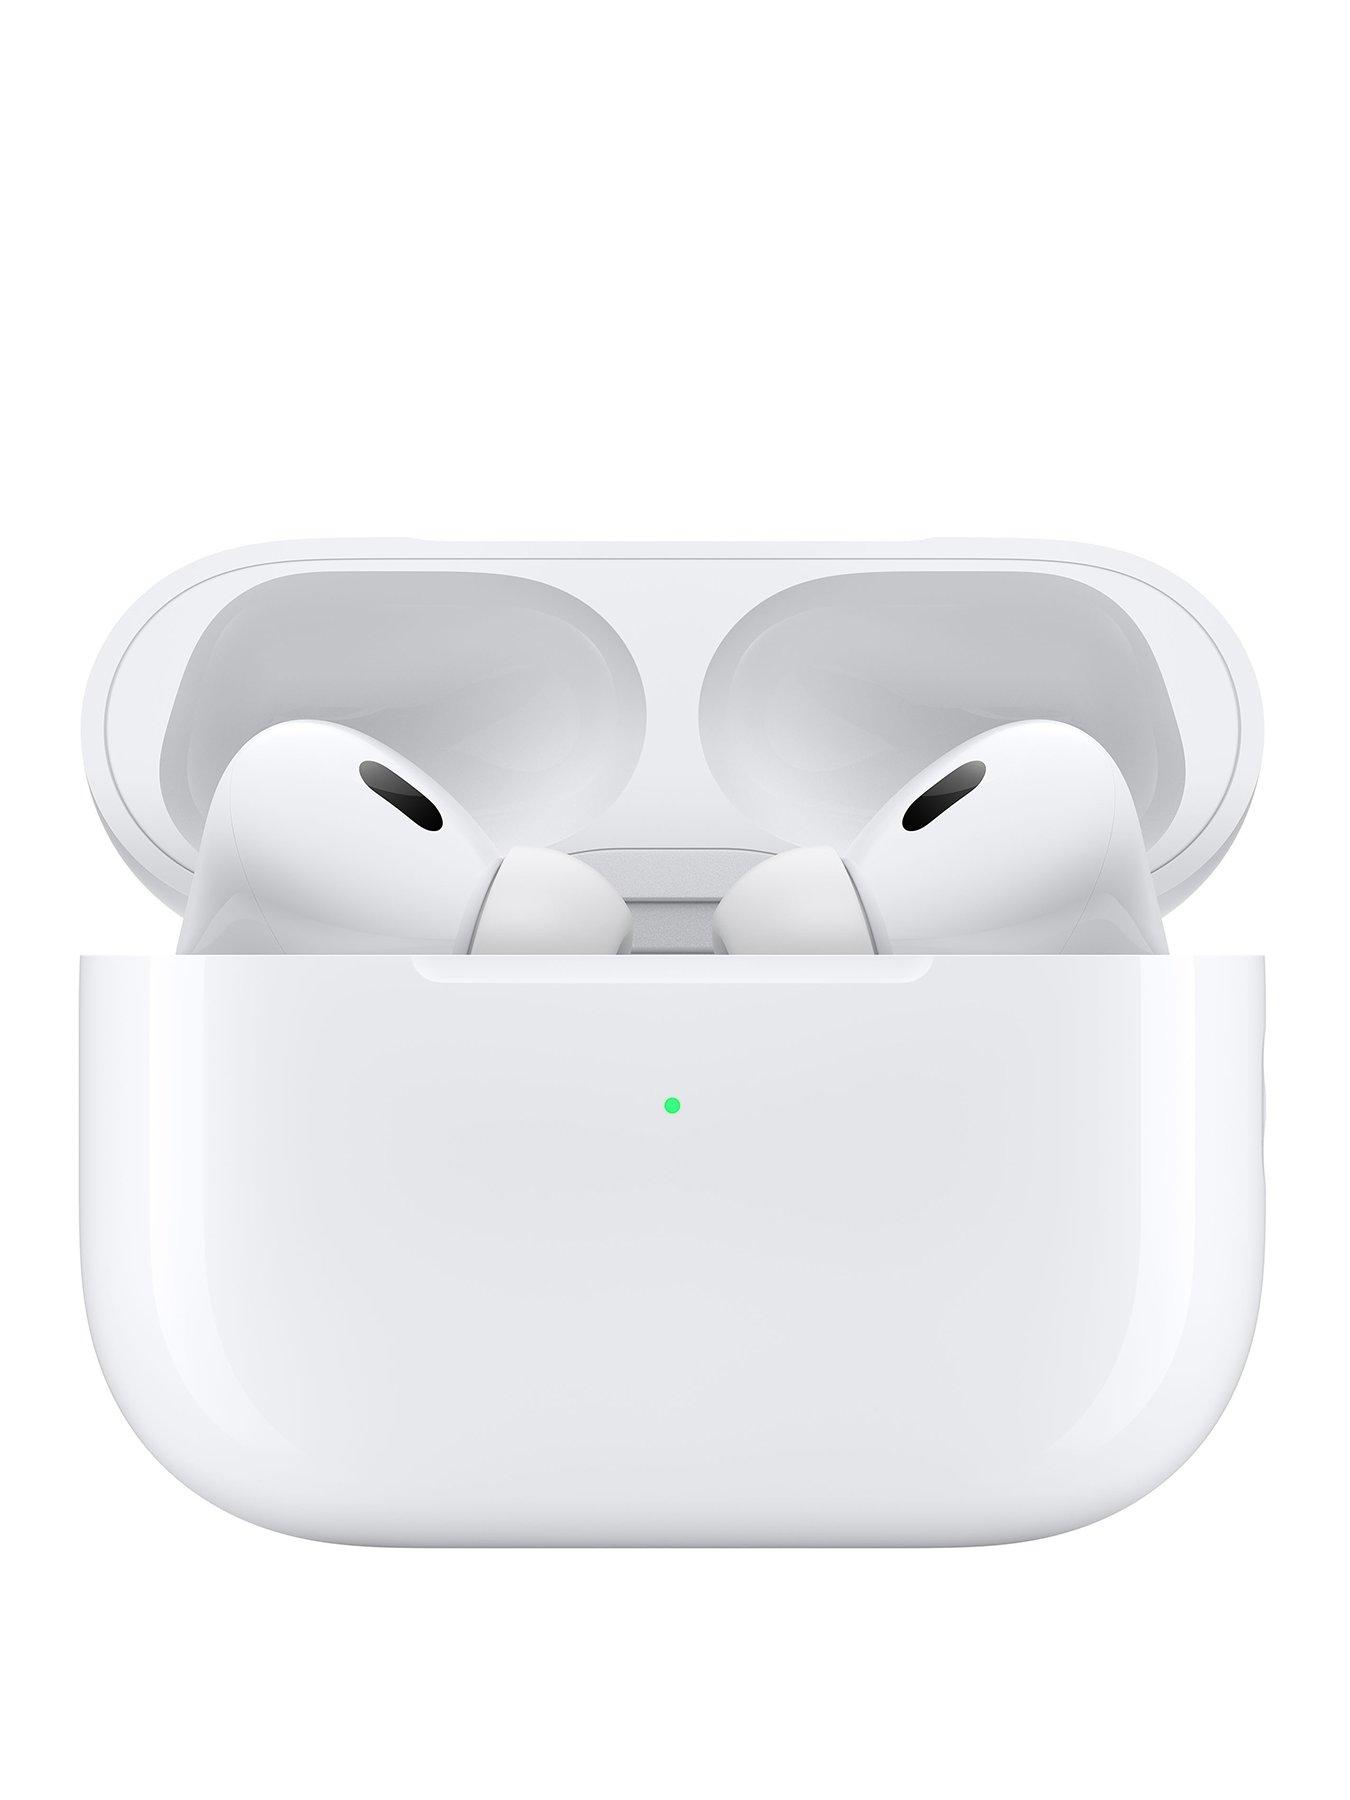 Apple AirPods sold out on Boxing Day — but they're back in stock